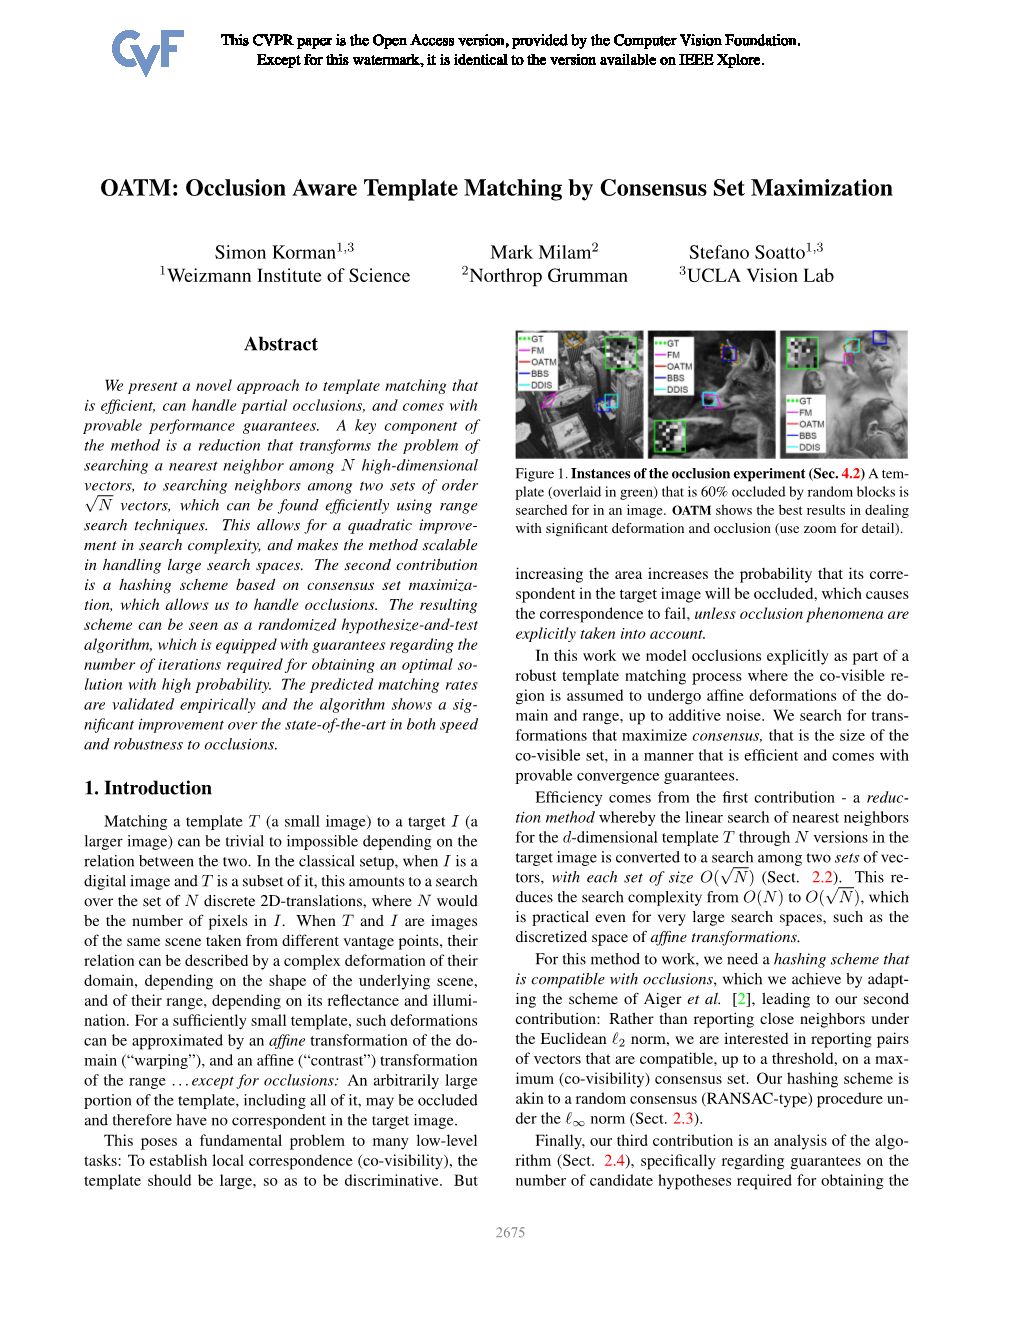 OATM: Occlusion Aware Template Matching by Consensus Set Maximization